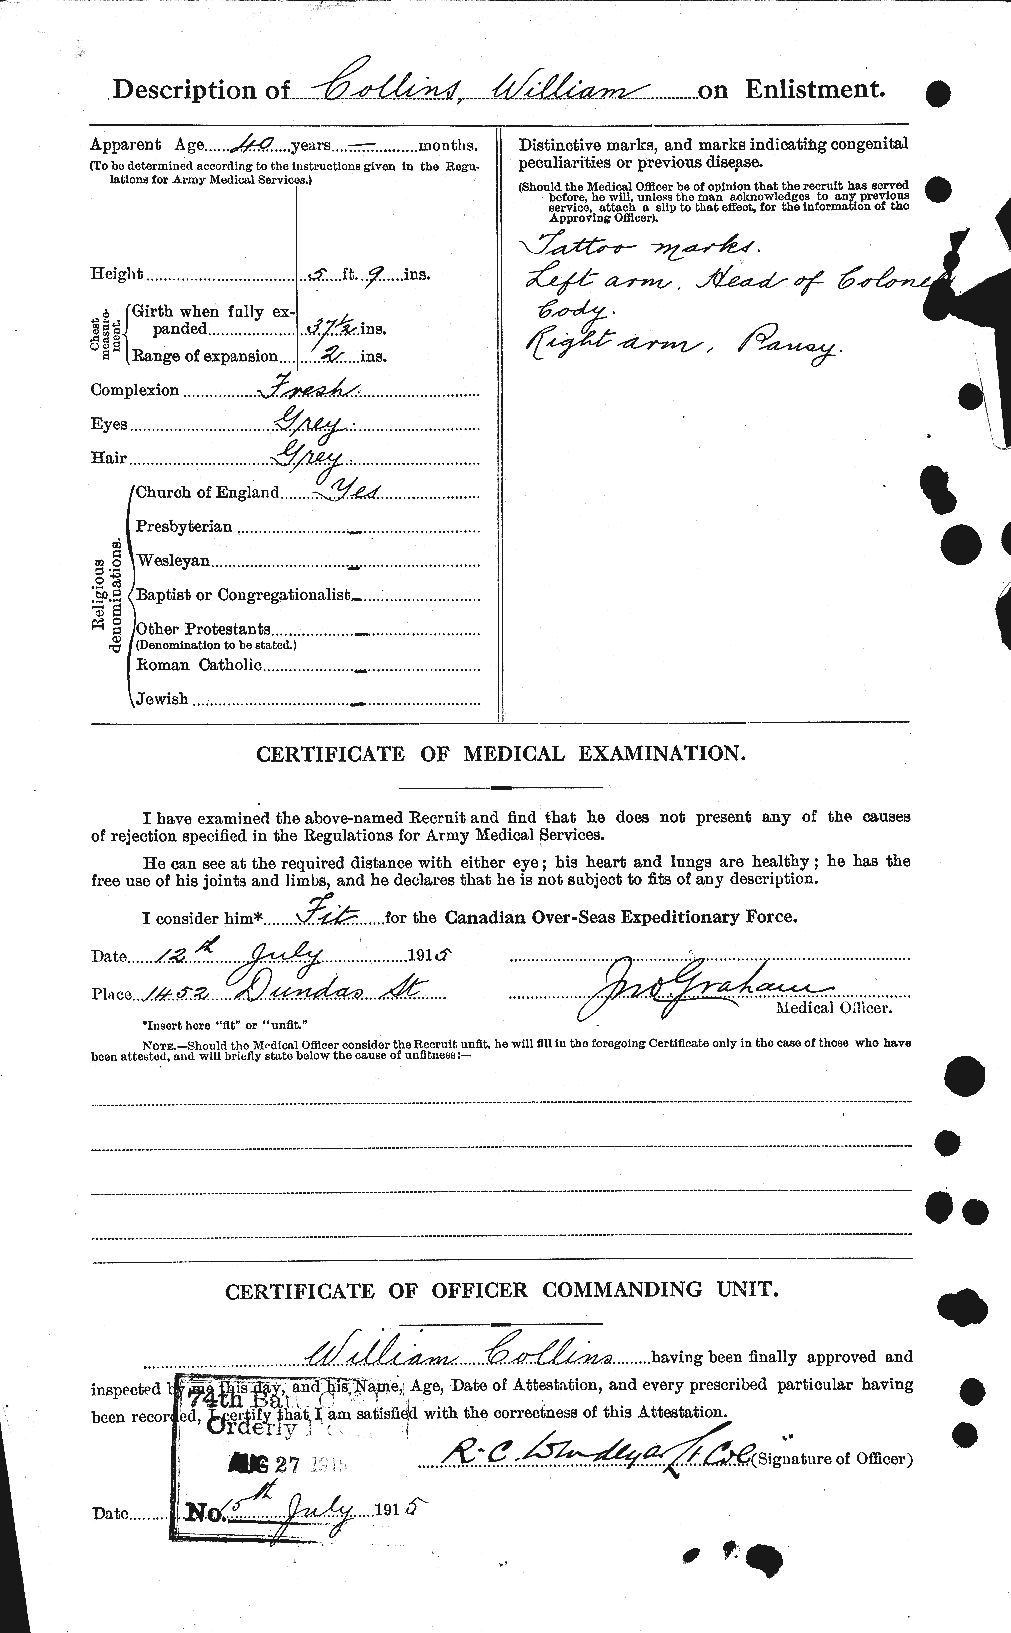 Personnel Records of the First World War - CEF 068819b